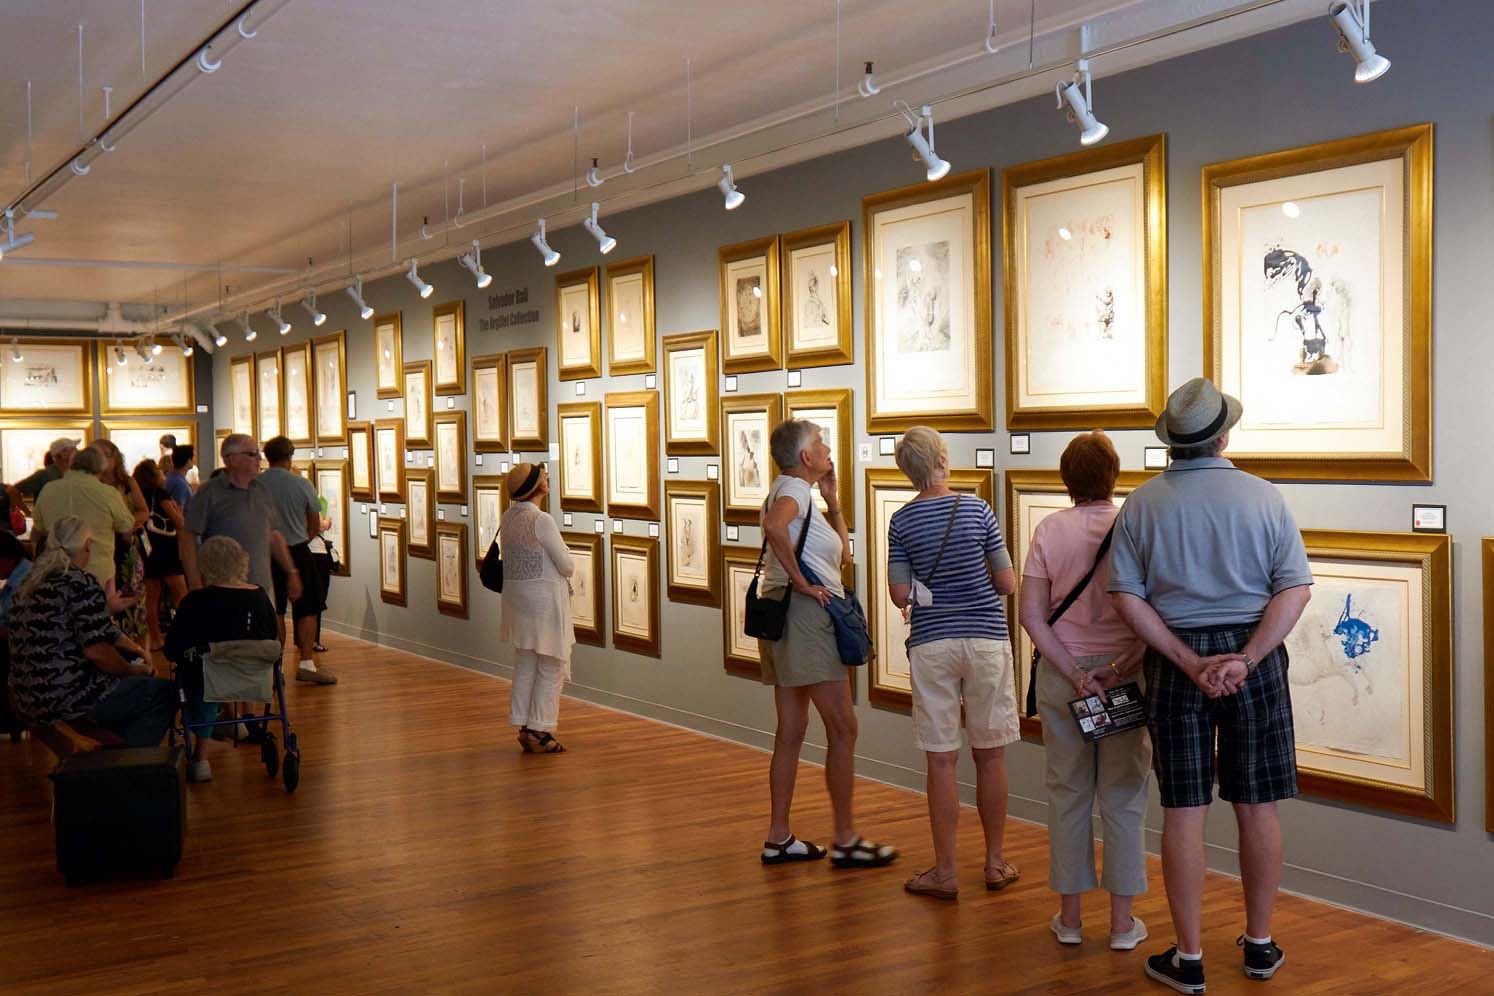 Interior of Meyer Fine Art gallery in Little Italy, San Diego featuring visitors interacting with gold-framed artwork on a wall